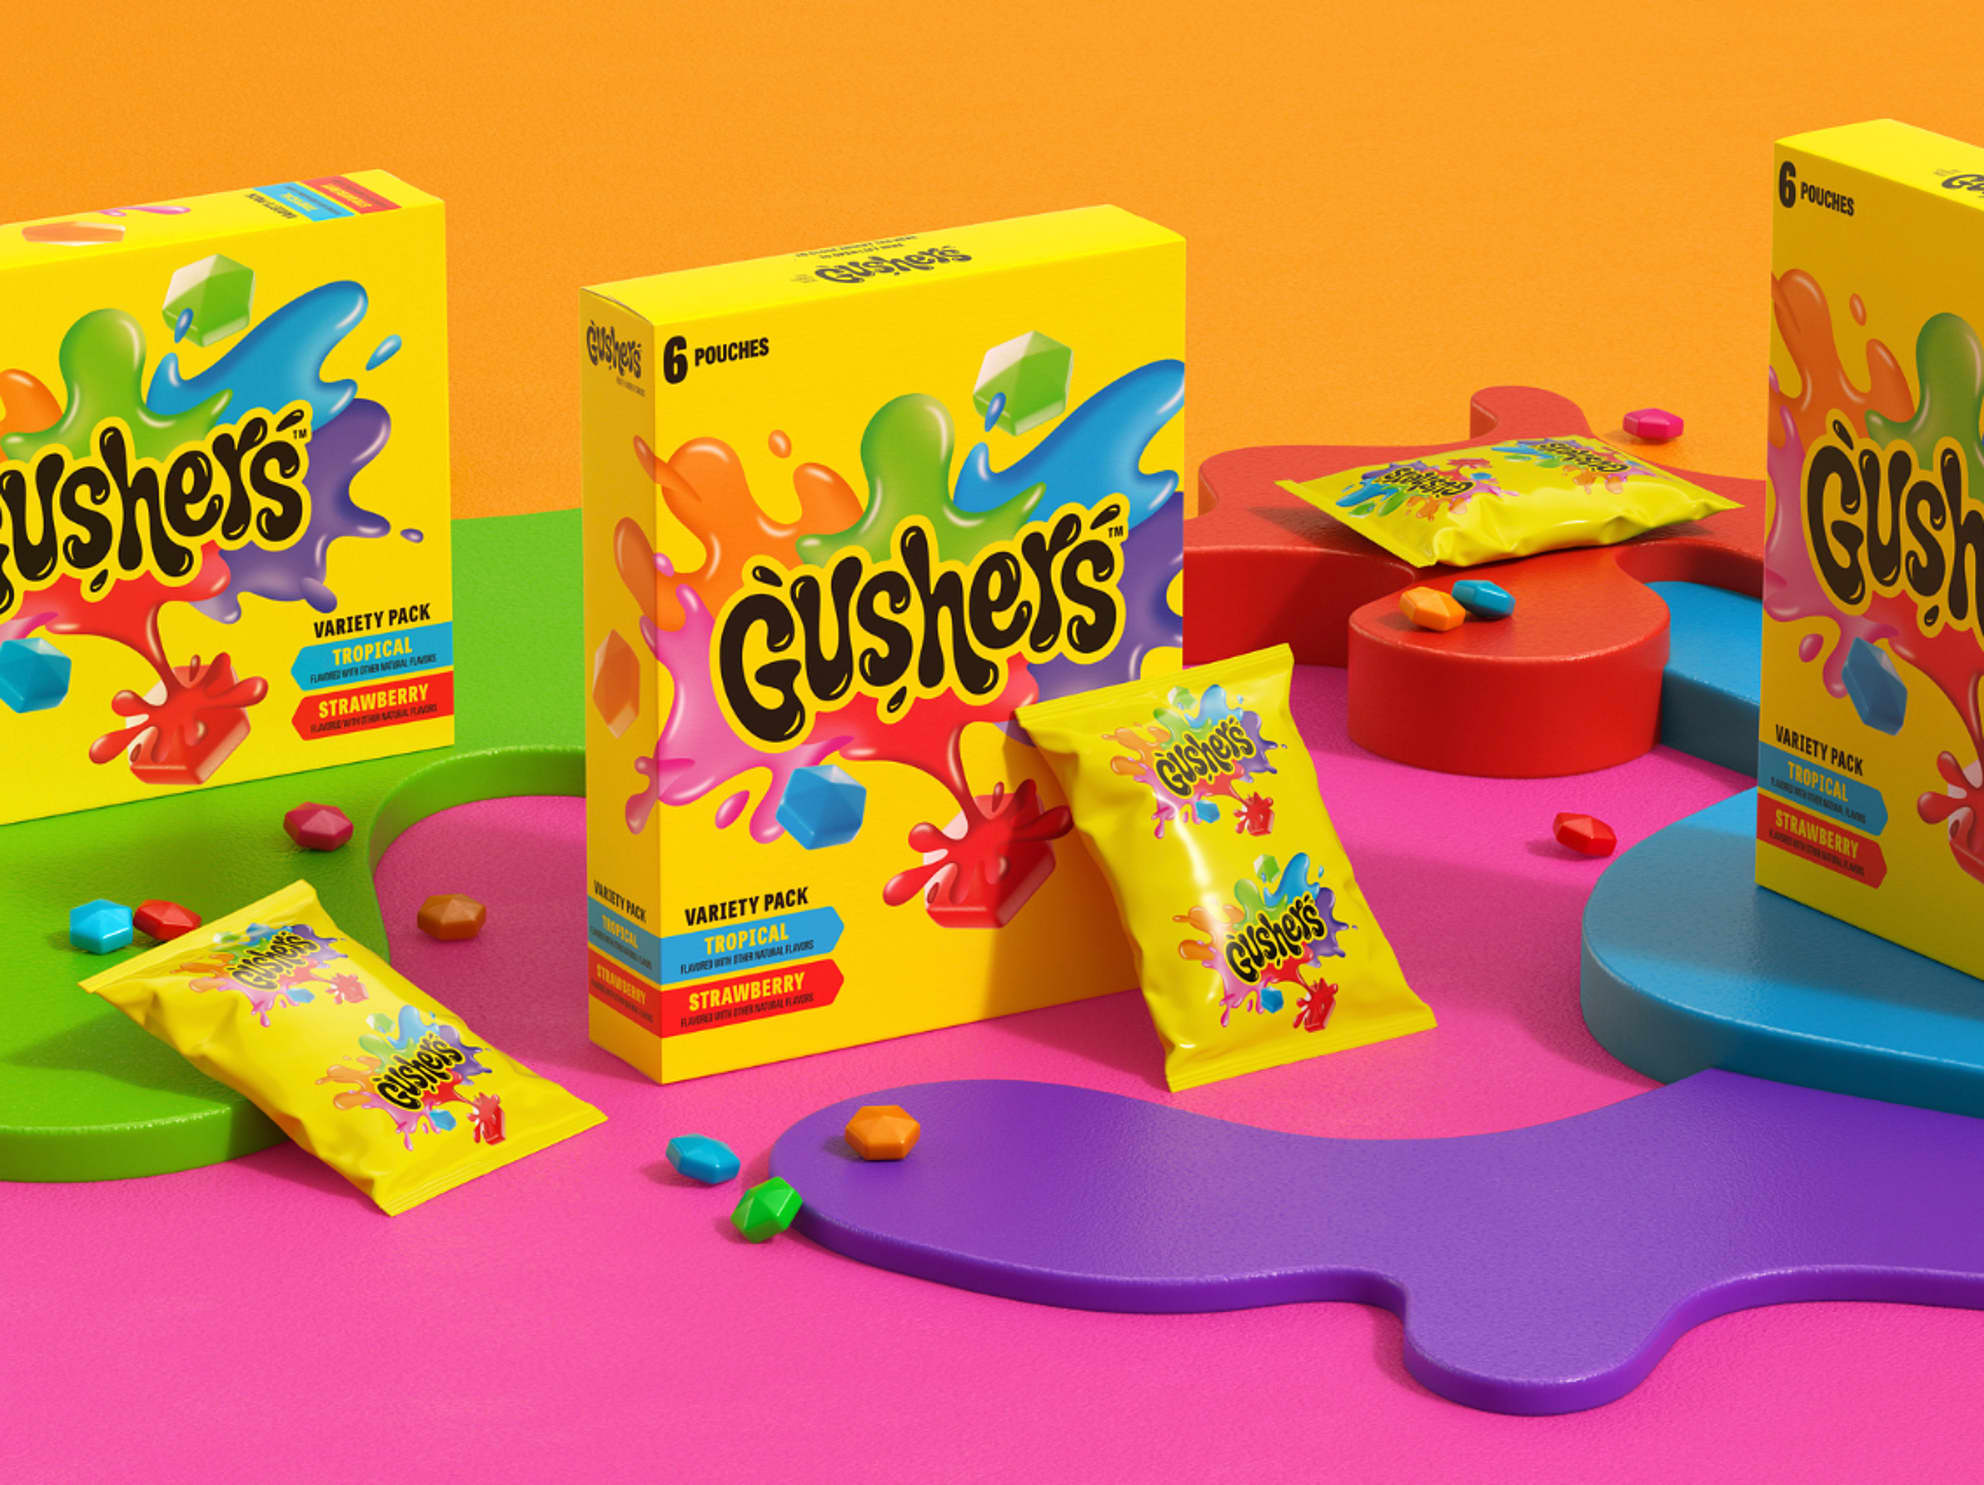 New Gushers packaging